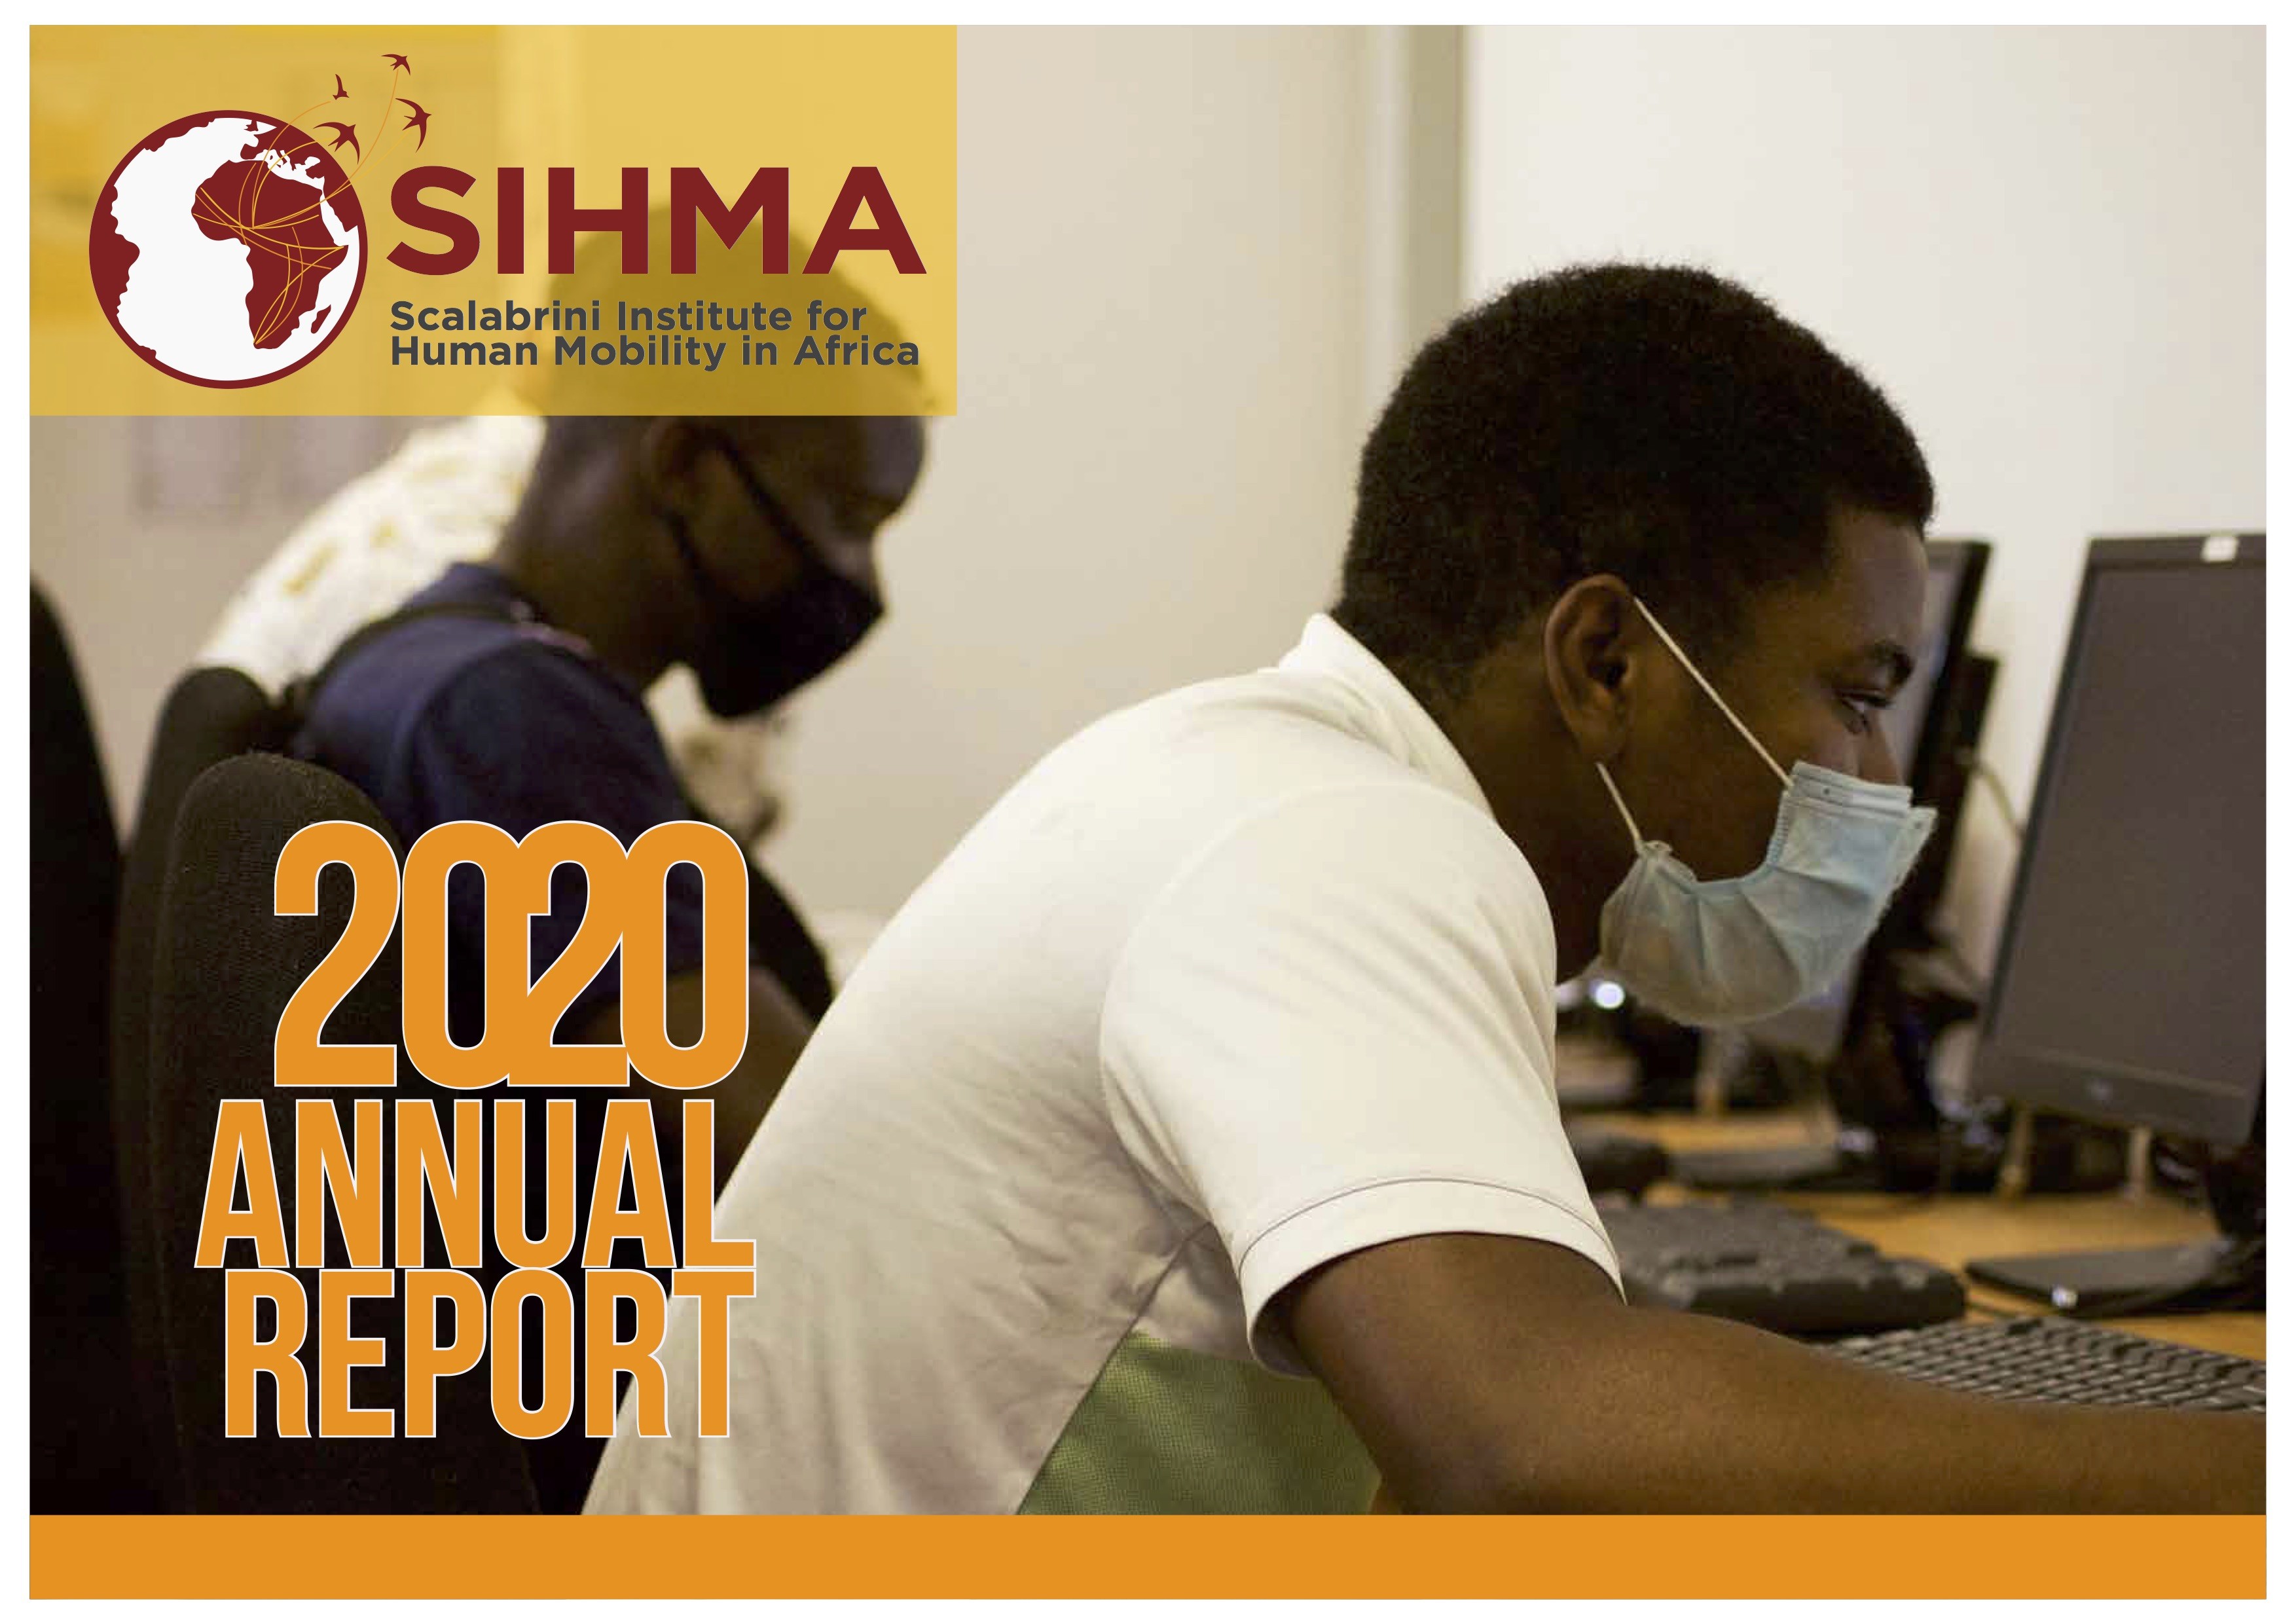 https://sihma.org.za/photos/shares/SIHMA Annual Report 2020-21 cover.jpg